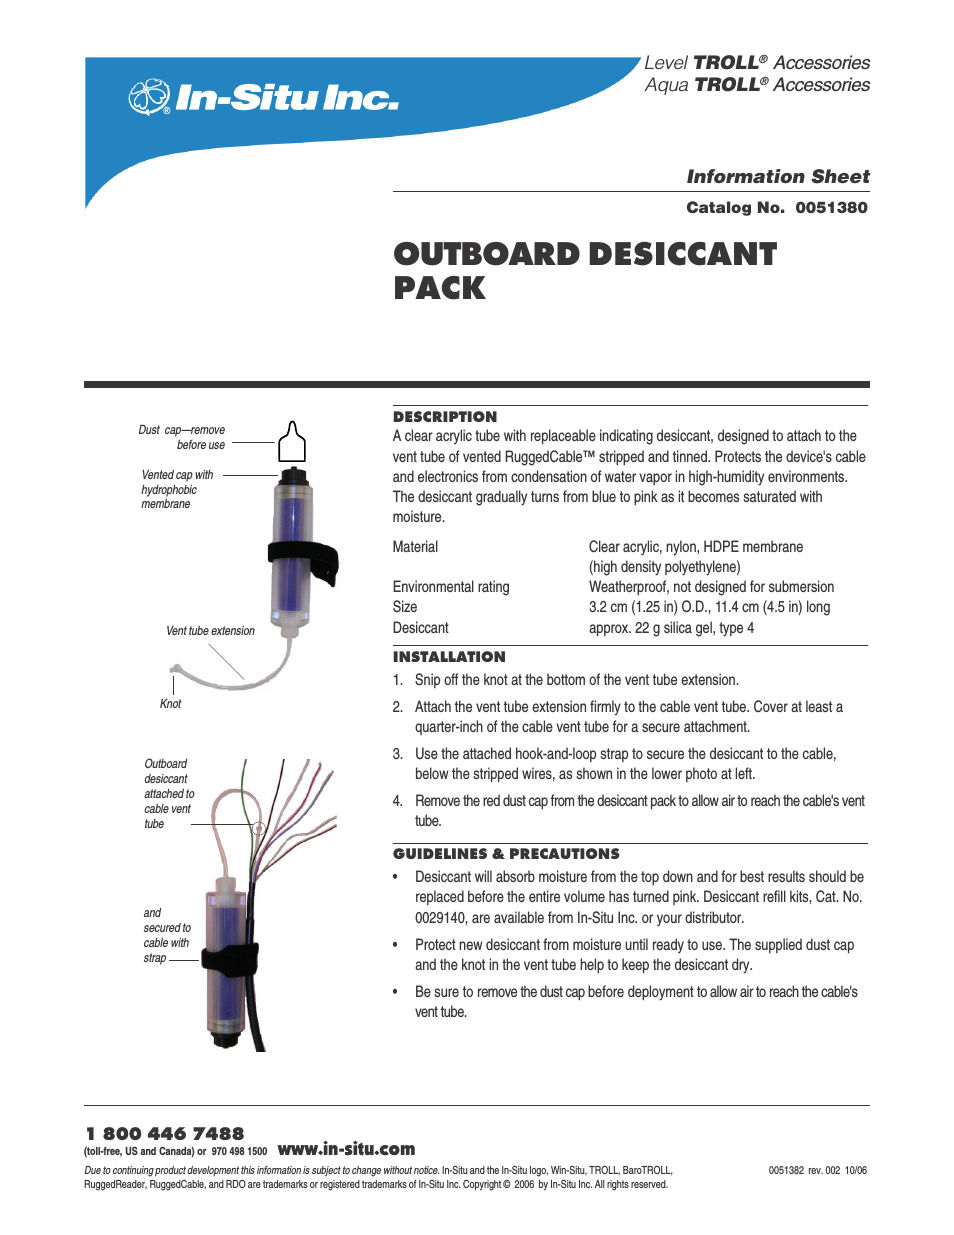 Outboard Desiccant for Use with Stripped and Tinned RuggedCable Systems